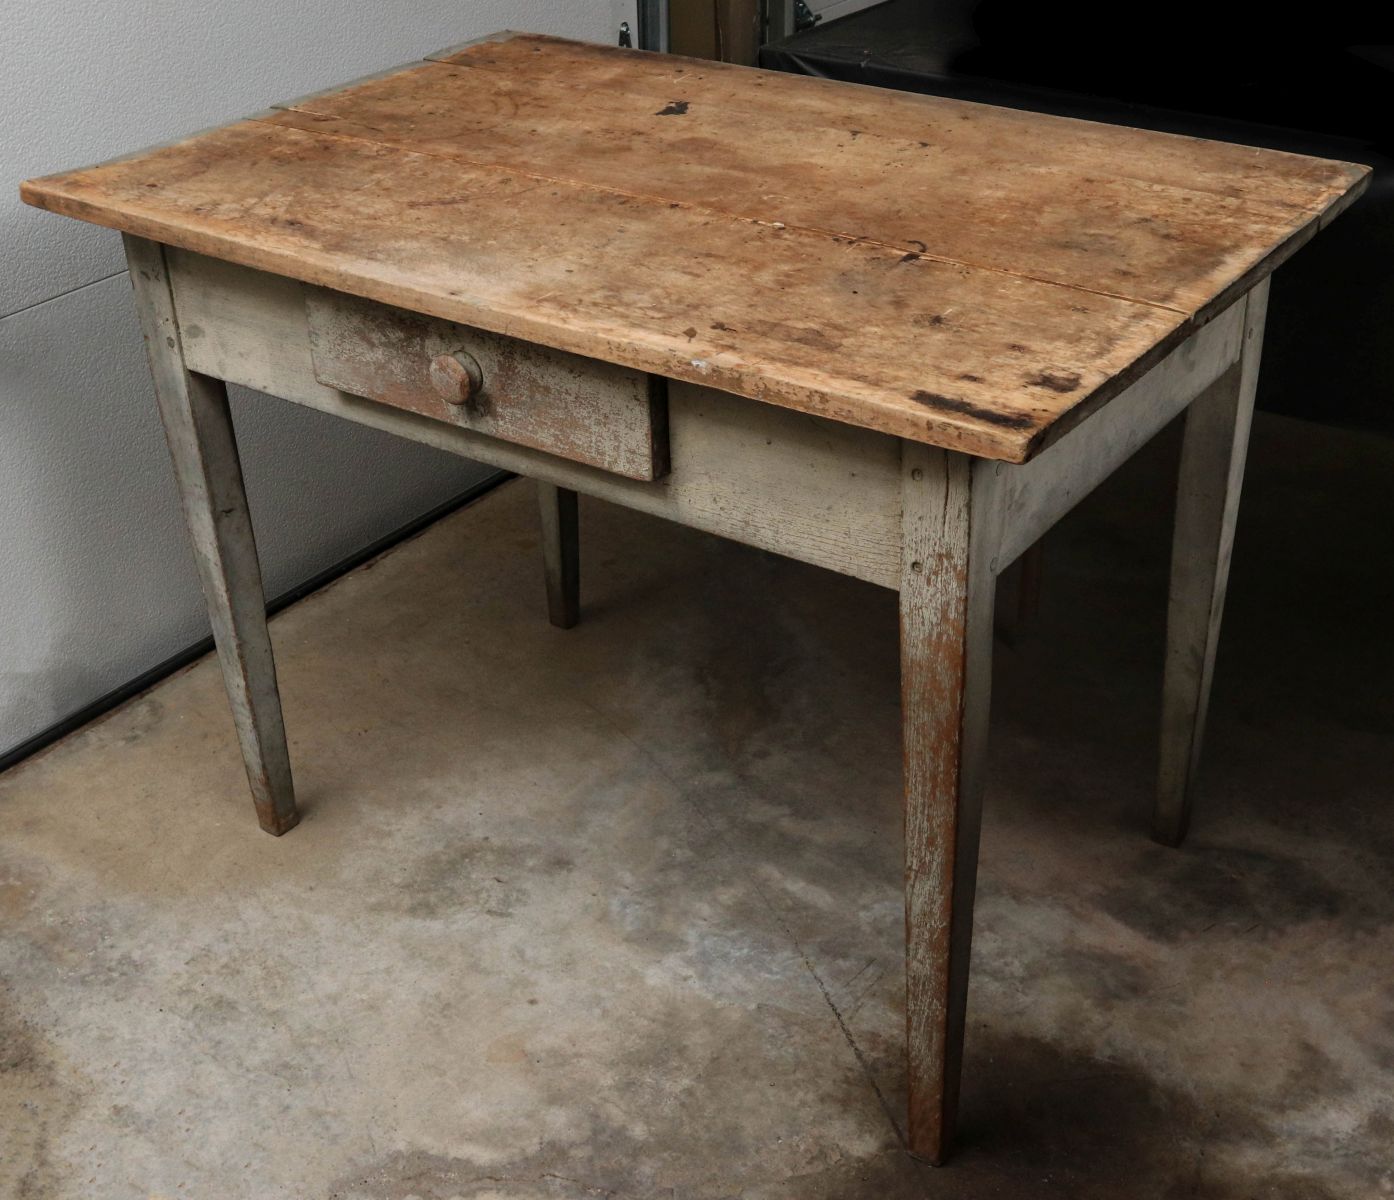 A 19C. AMERICAN SCRUB TOP WORK TABLE IN OLD PAINT